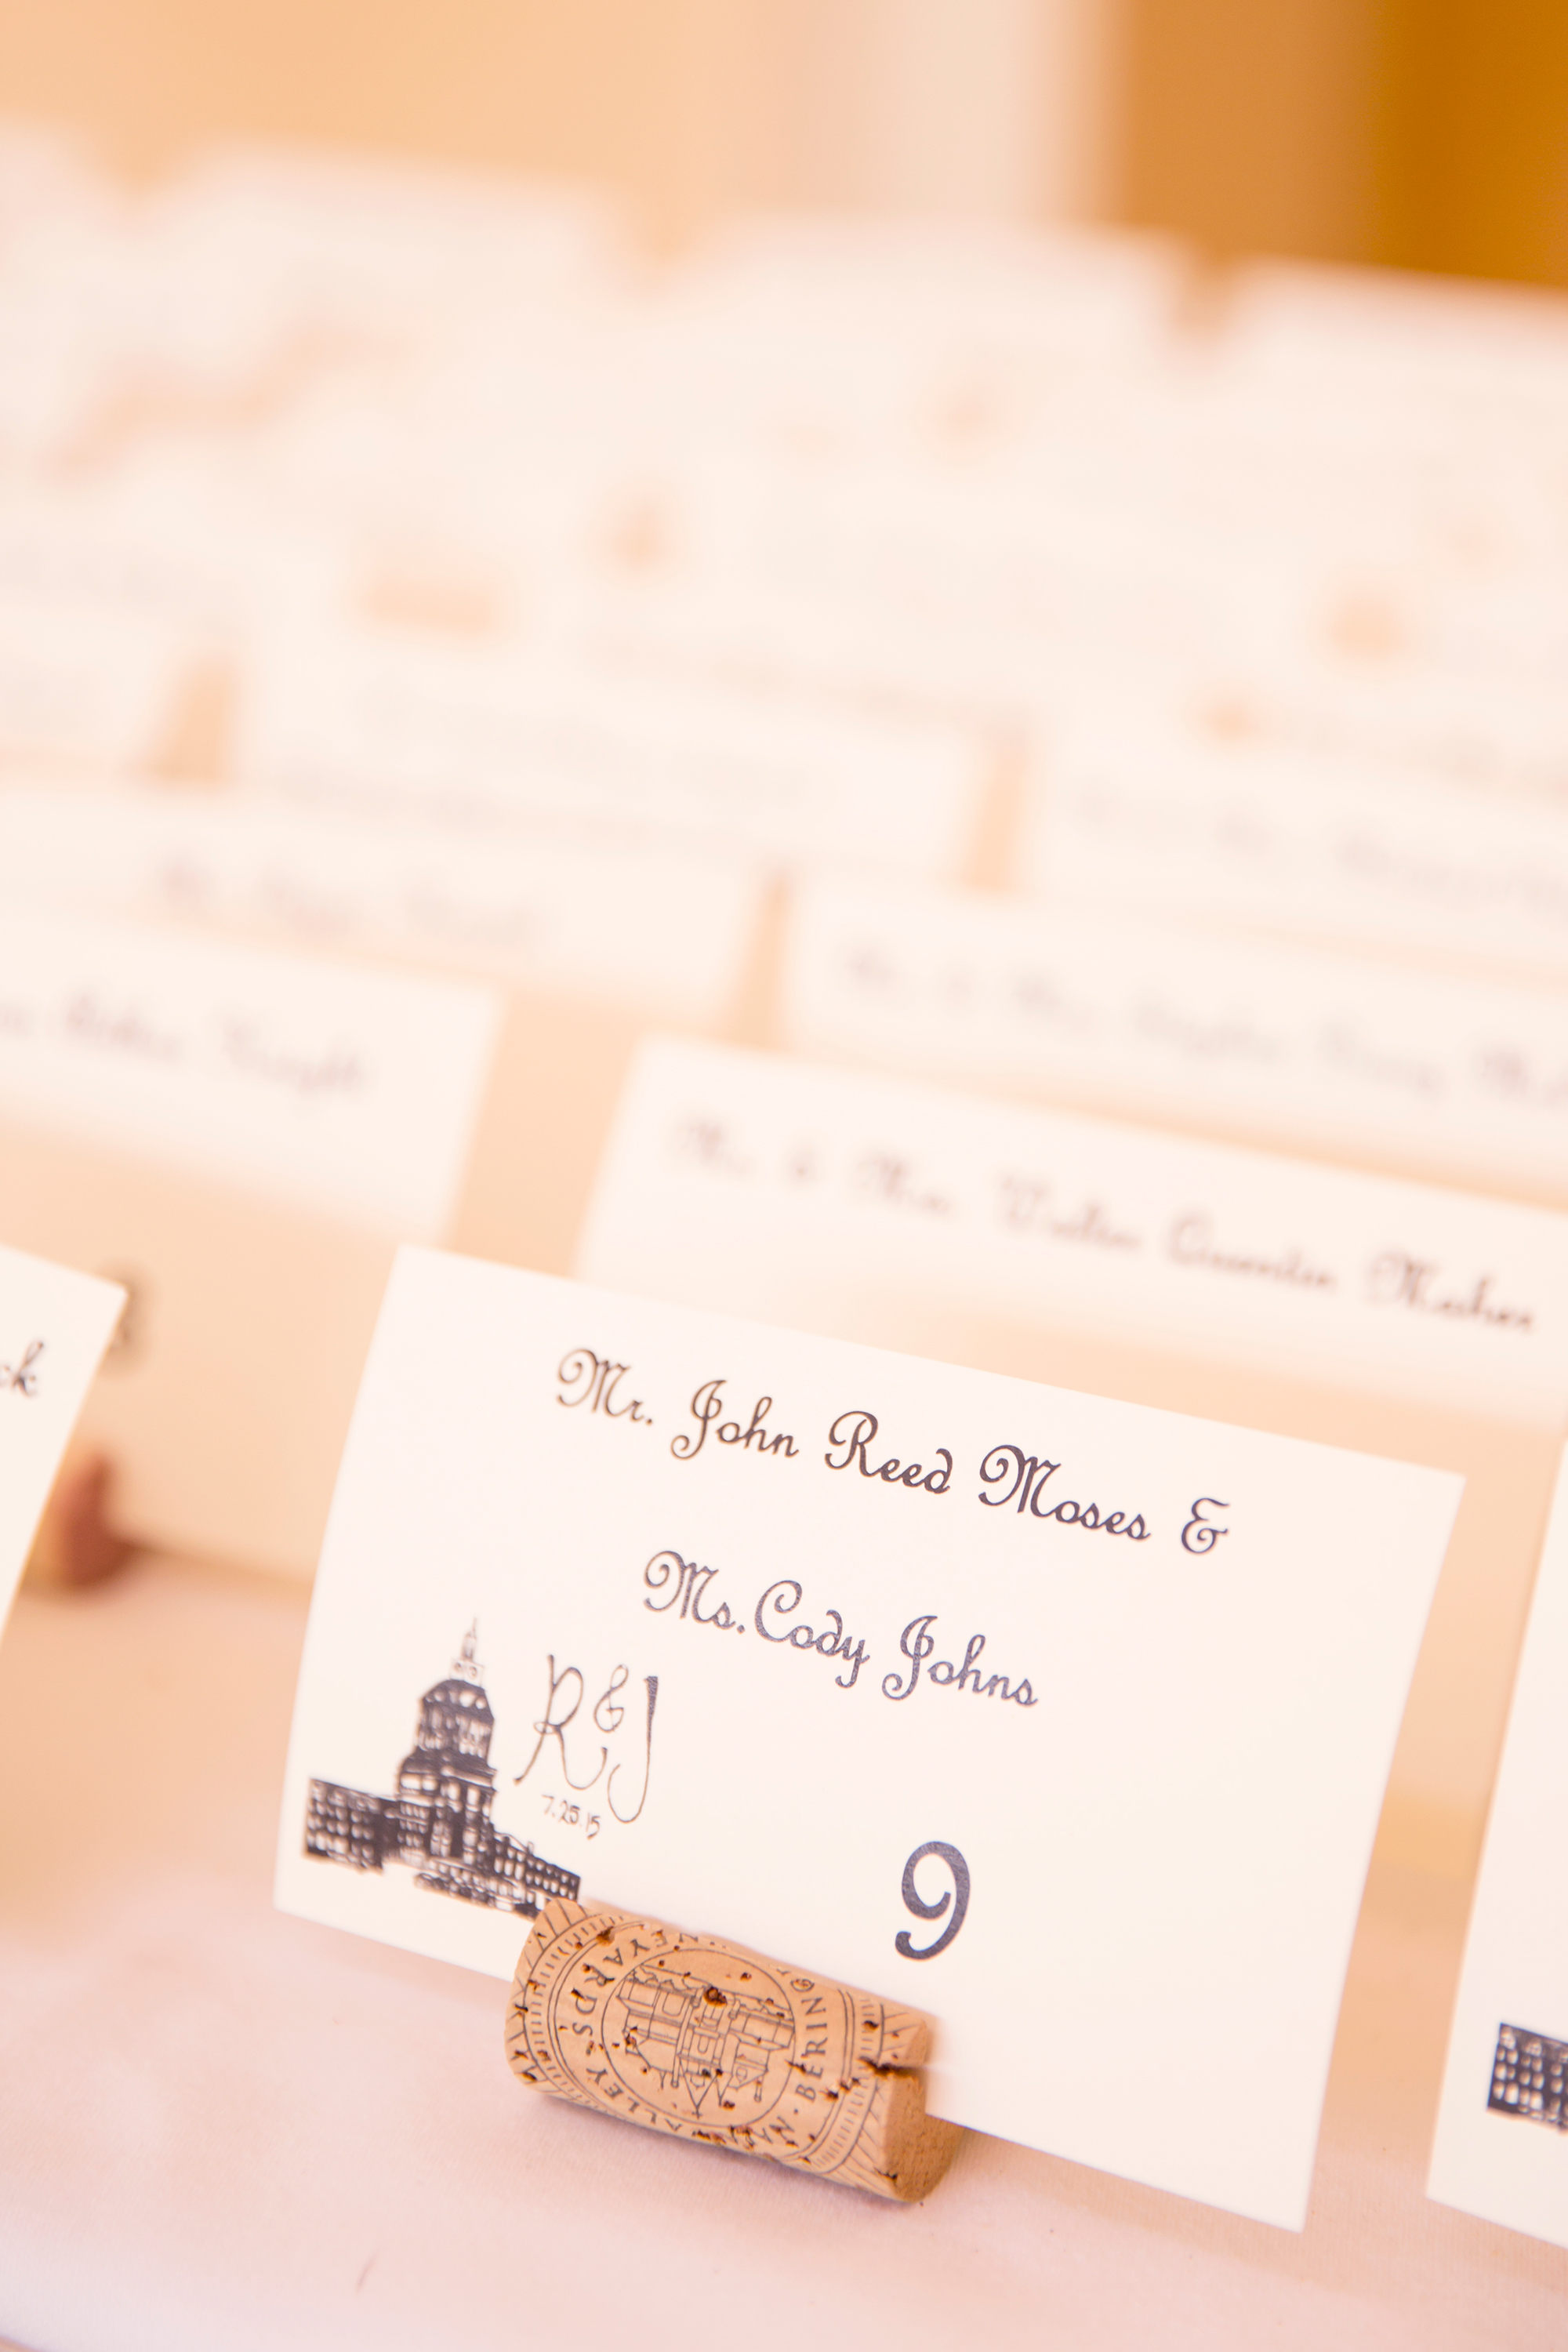 How to Plan a Blog Worthy Wedding on a Budget - Image Property of www.j-dphoto.com